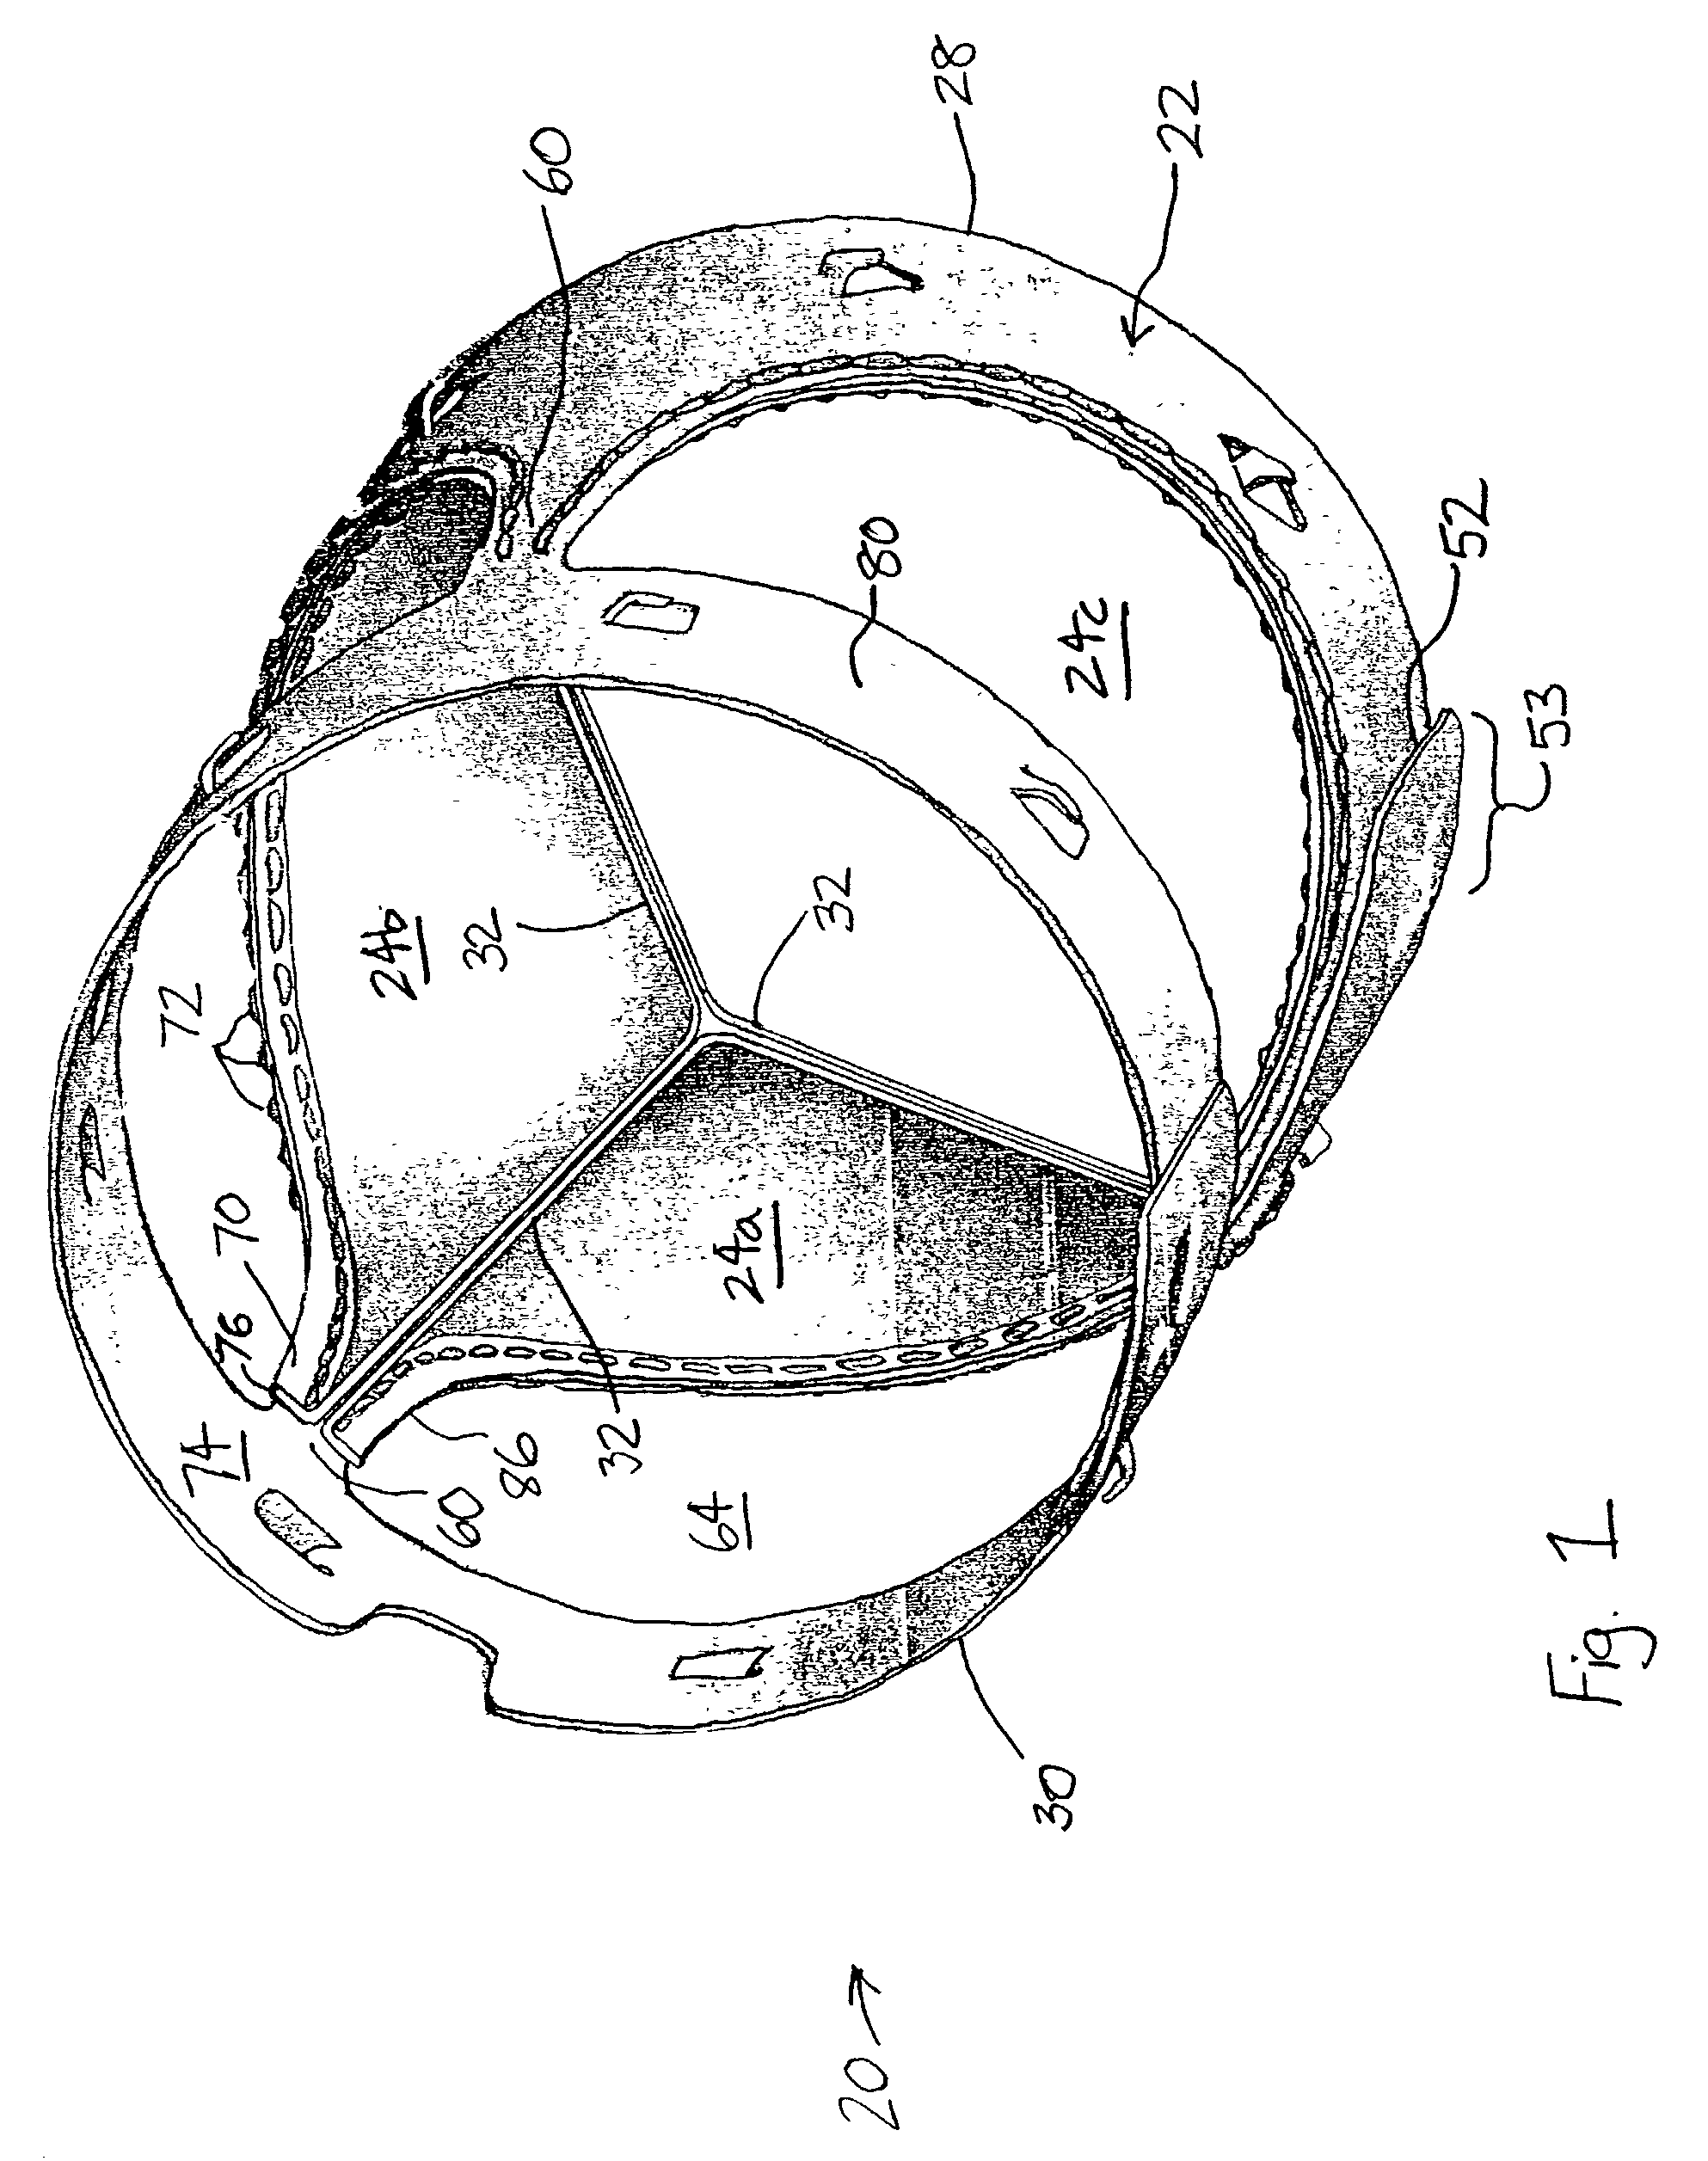 Rolled minimally-invasive heart valves and methods of manufacture